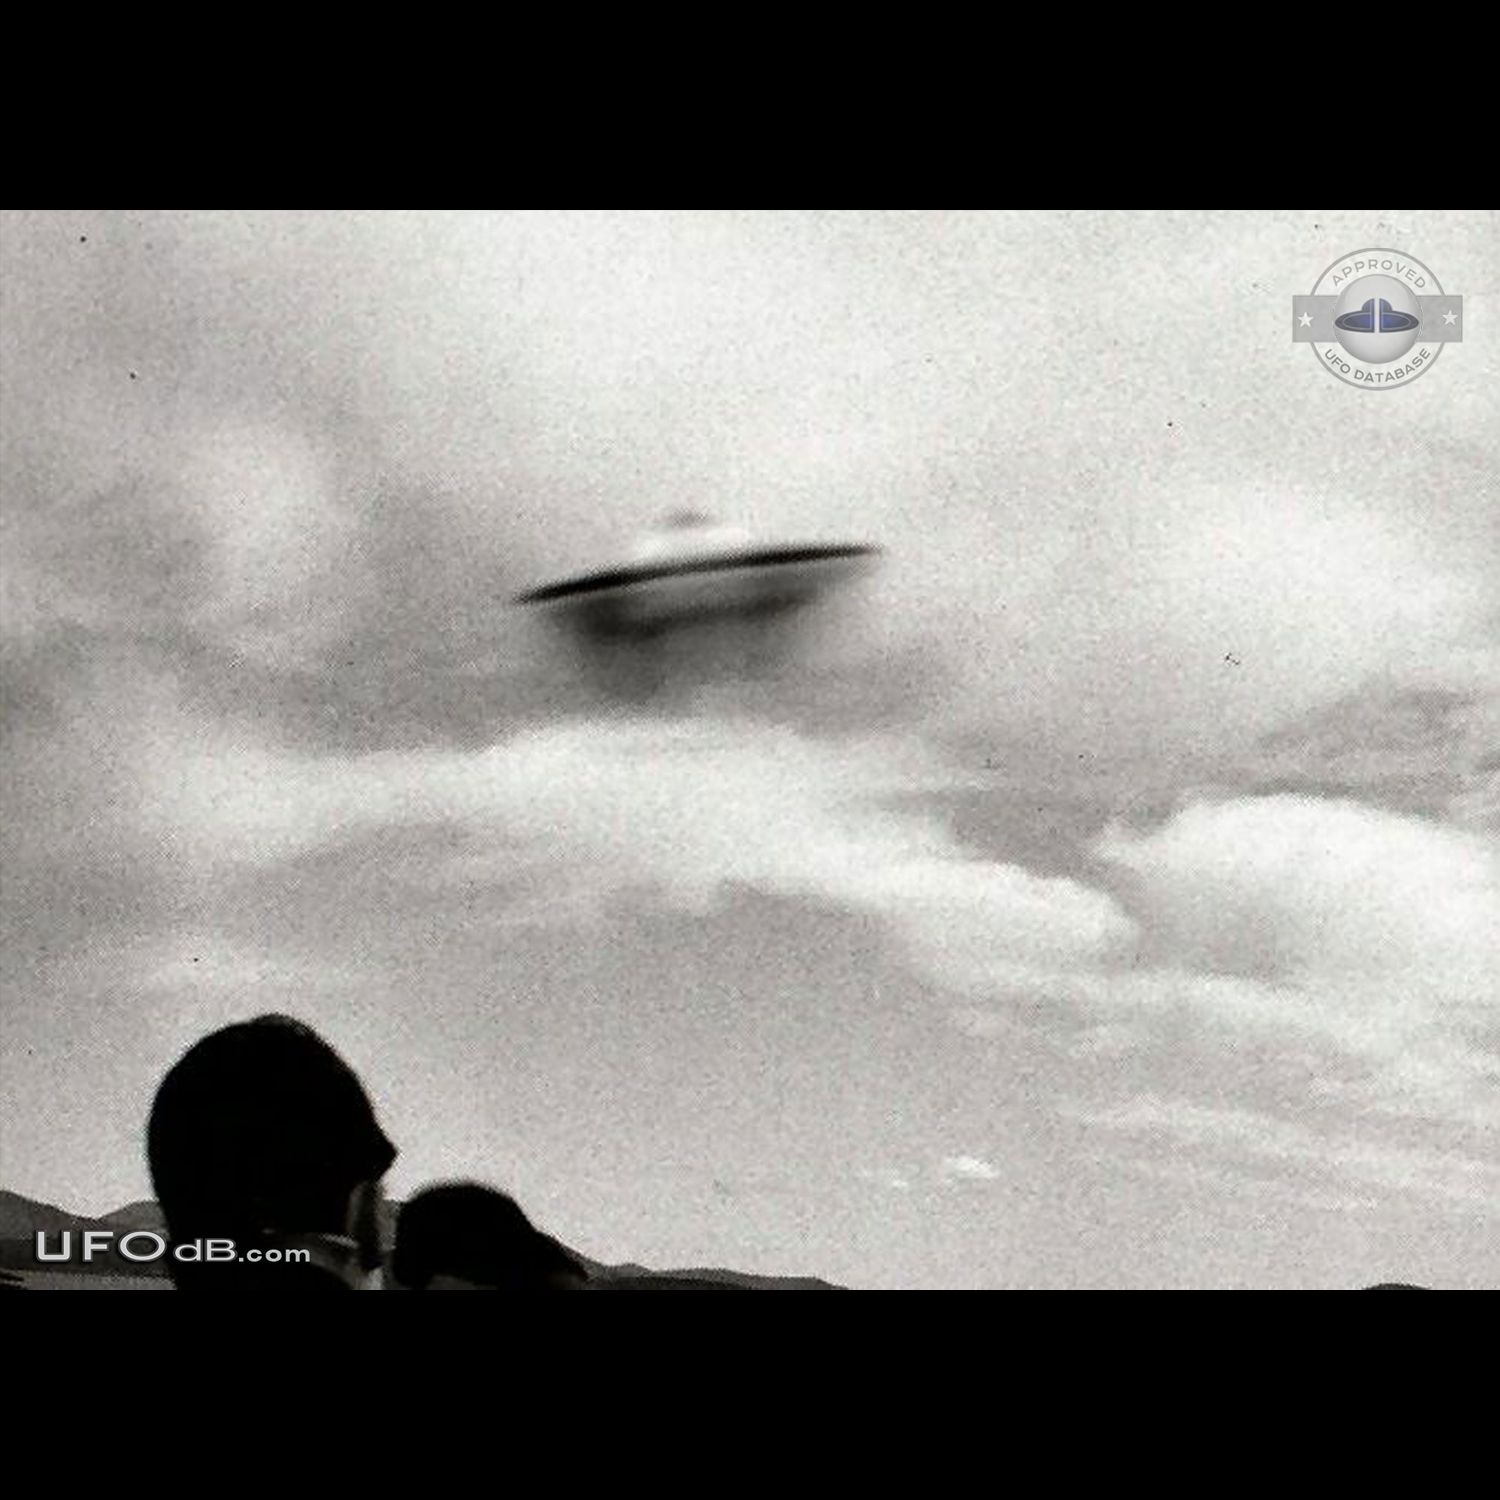 Old Grey 1968 UFO picture from Clifden Ireland showing a double saucer UFO Picture #465-1